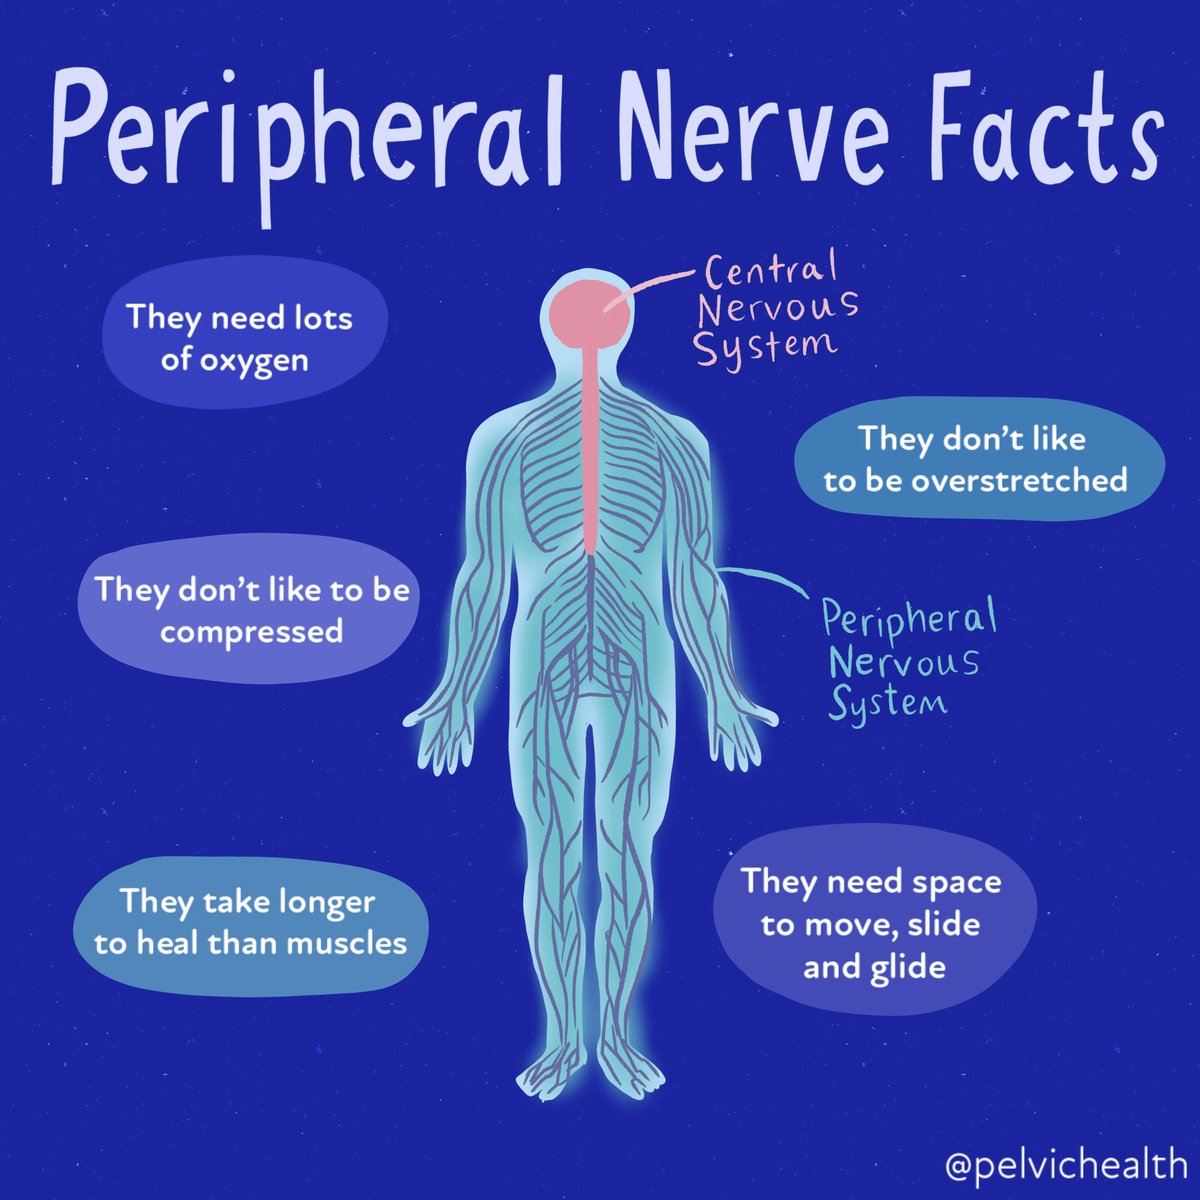 Let's talk Peripheral Nerve Facts today ▶️ Peripheral nerves are greedy with oxygen! They need more oxygen than other somatic structures in the body comparatively.

#pelvichealth #centralnervoussystem #pelvicfloor #peripheralnerves #medicalfacts #nervepain #chronicpain